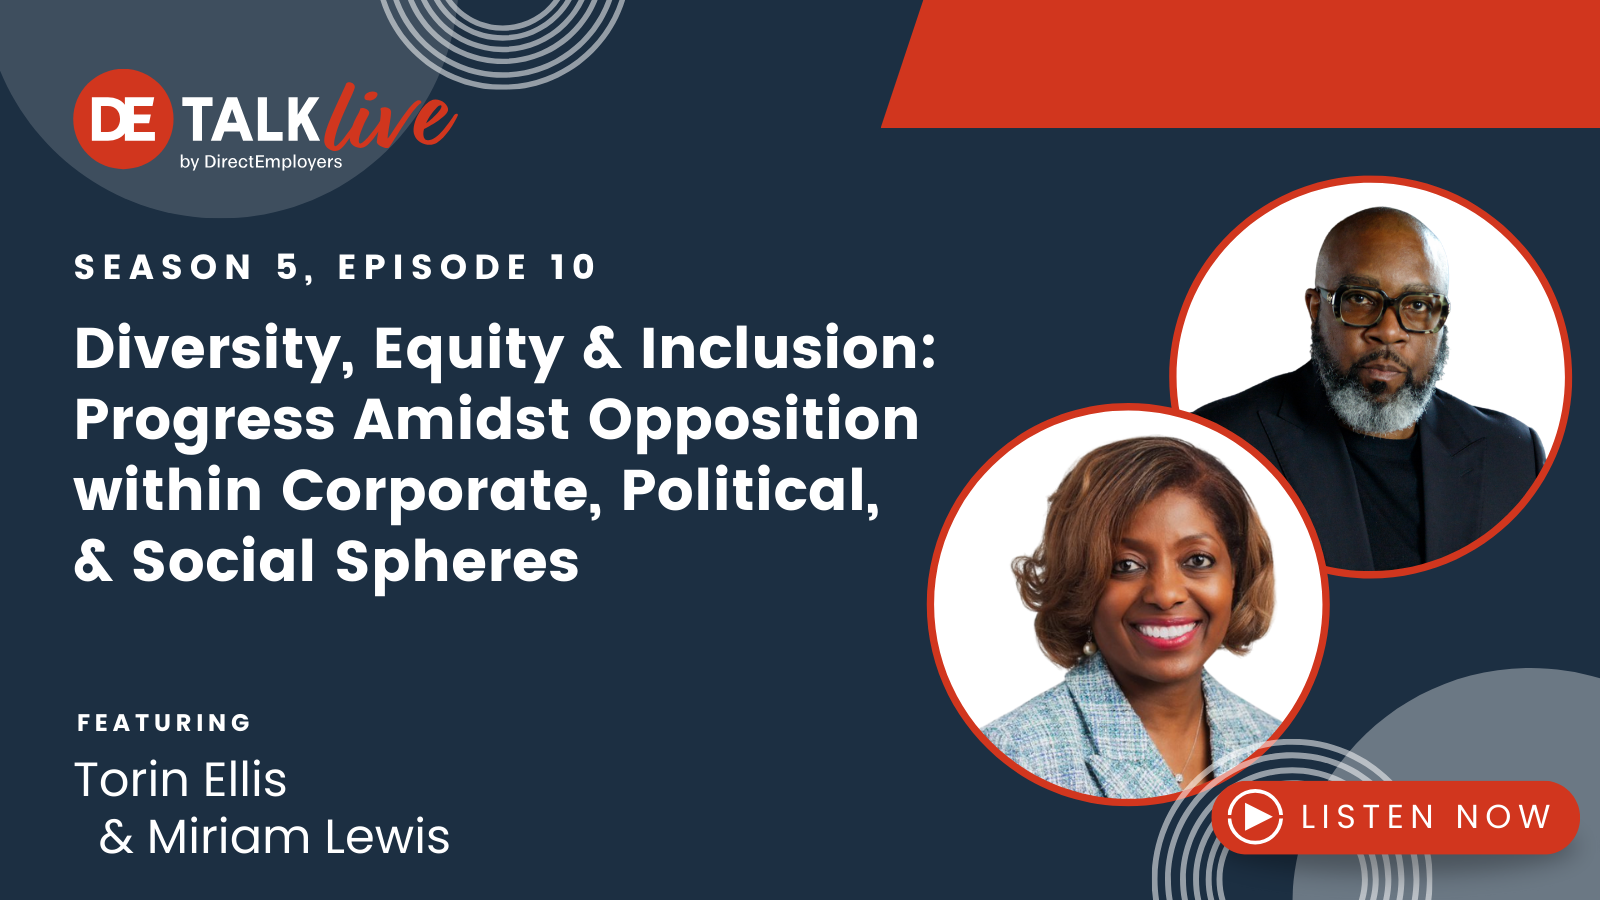 DE Talk S5E10 Diversity, Equity & Inclusion: Progress Amidst Opposition within Corporate, Political, & Social Spheres